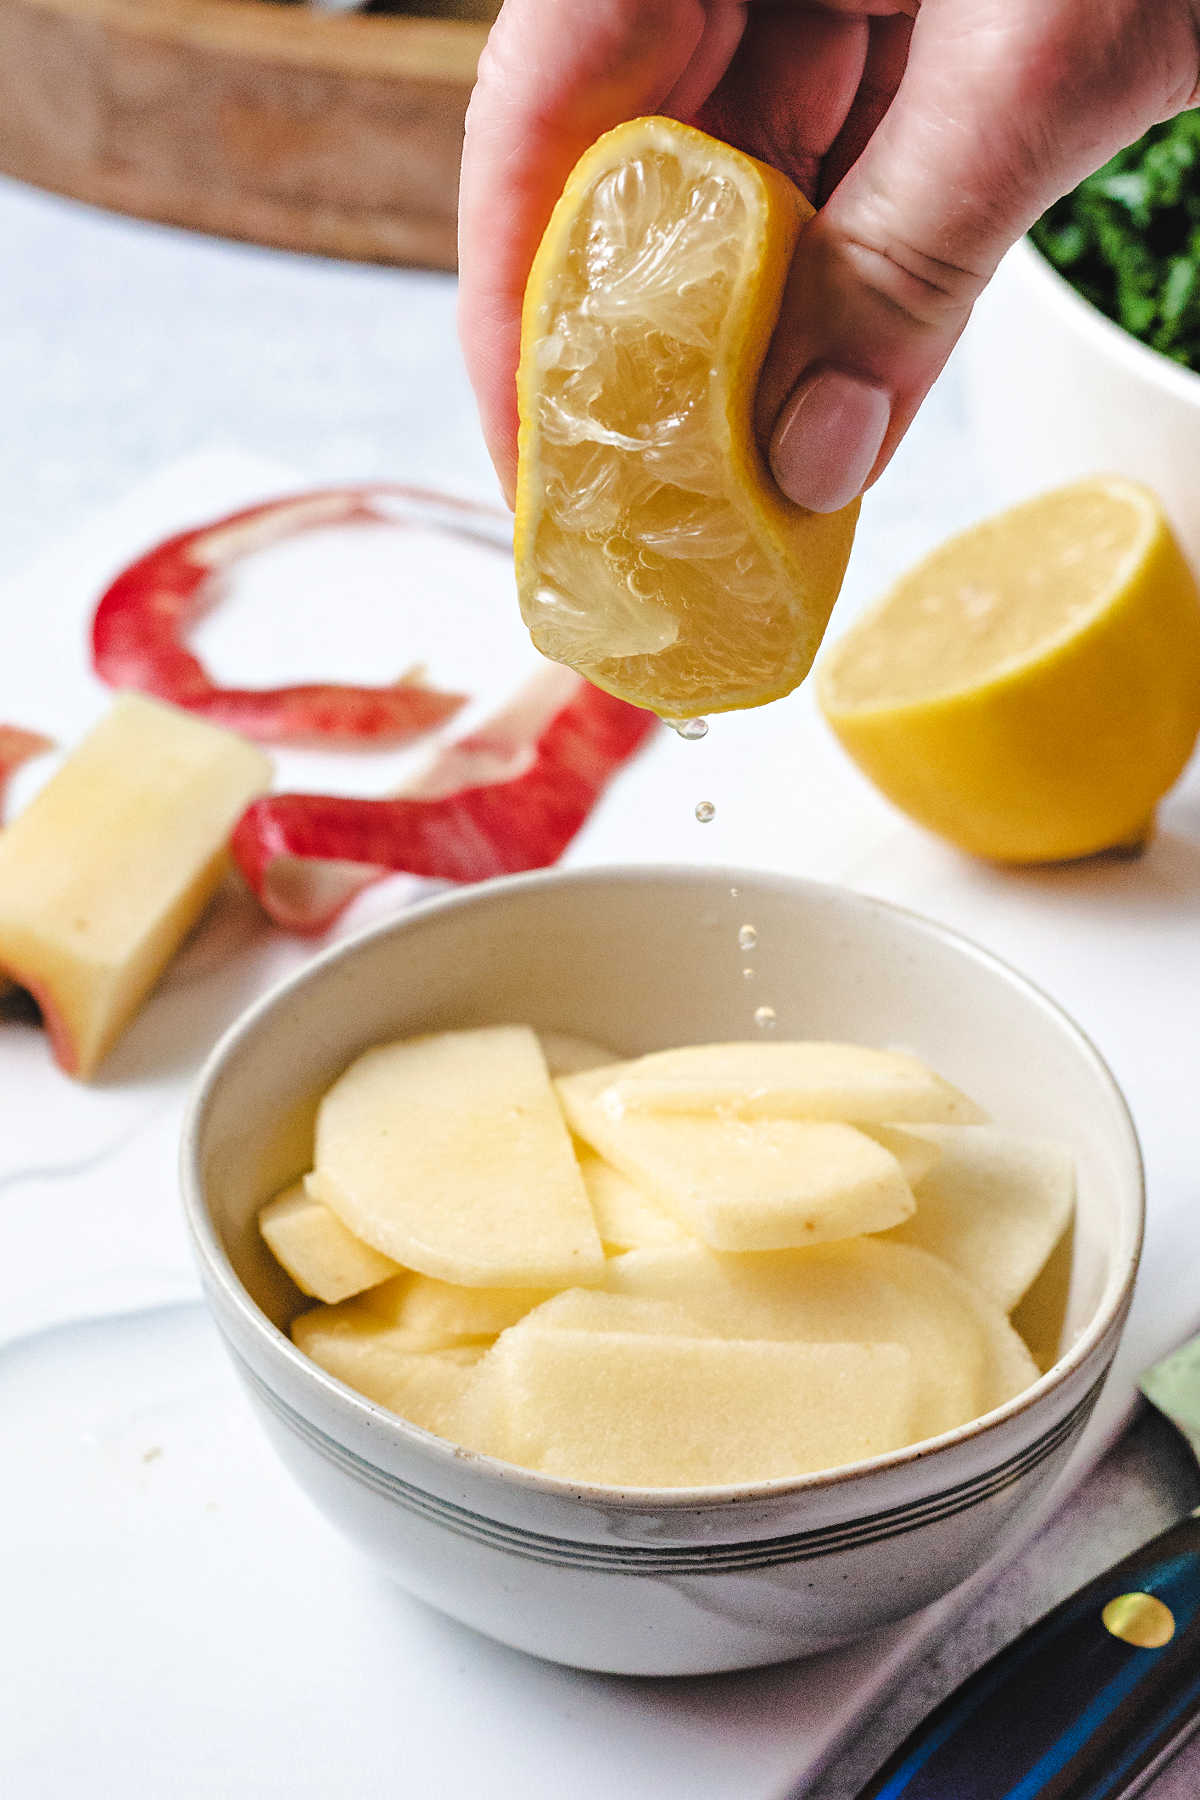 squeezing a fresh lemon into a bowl of apple slices.